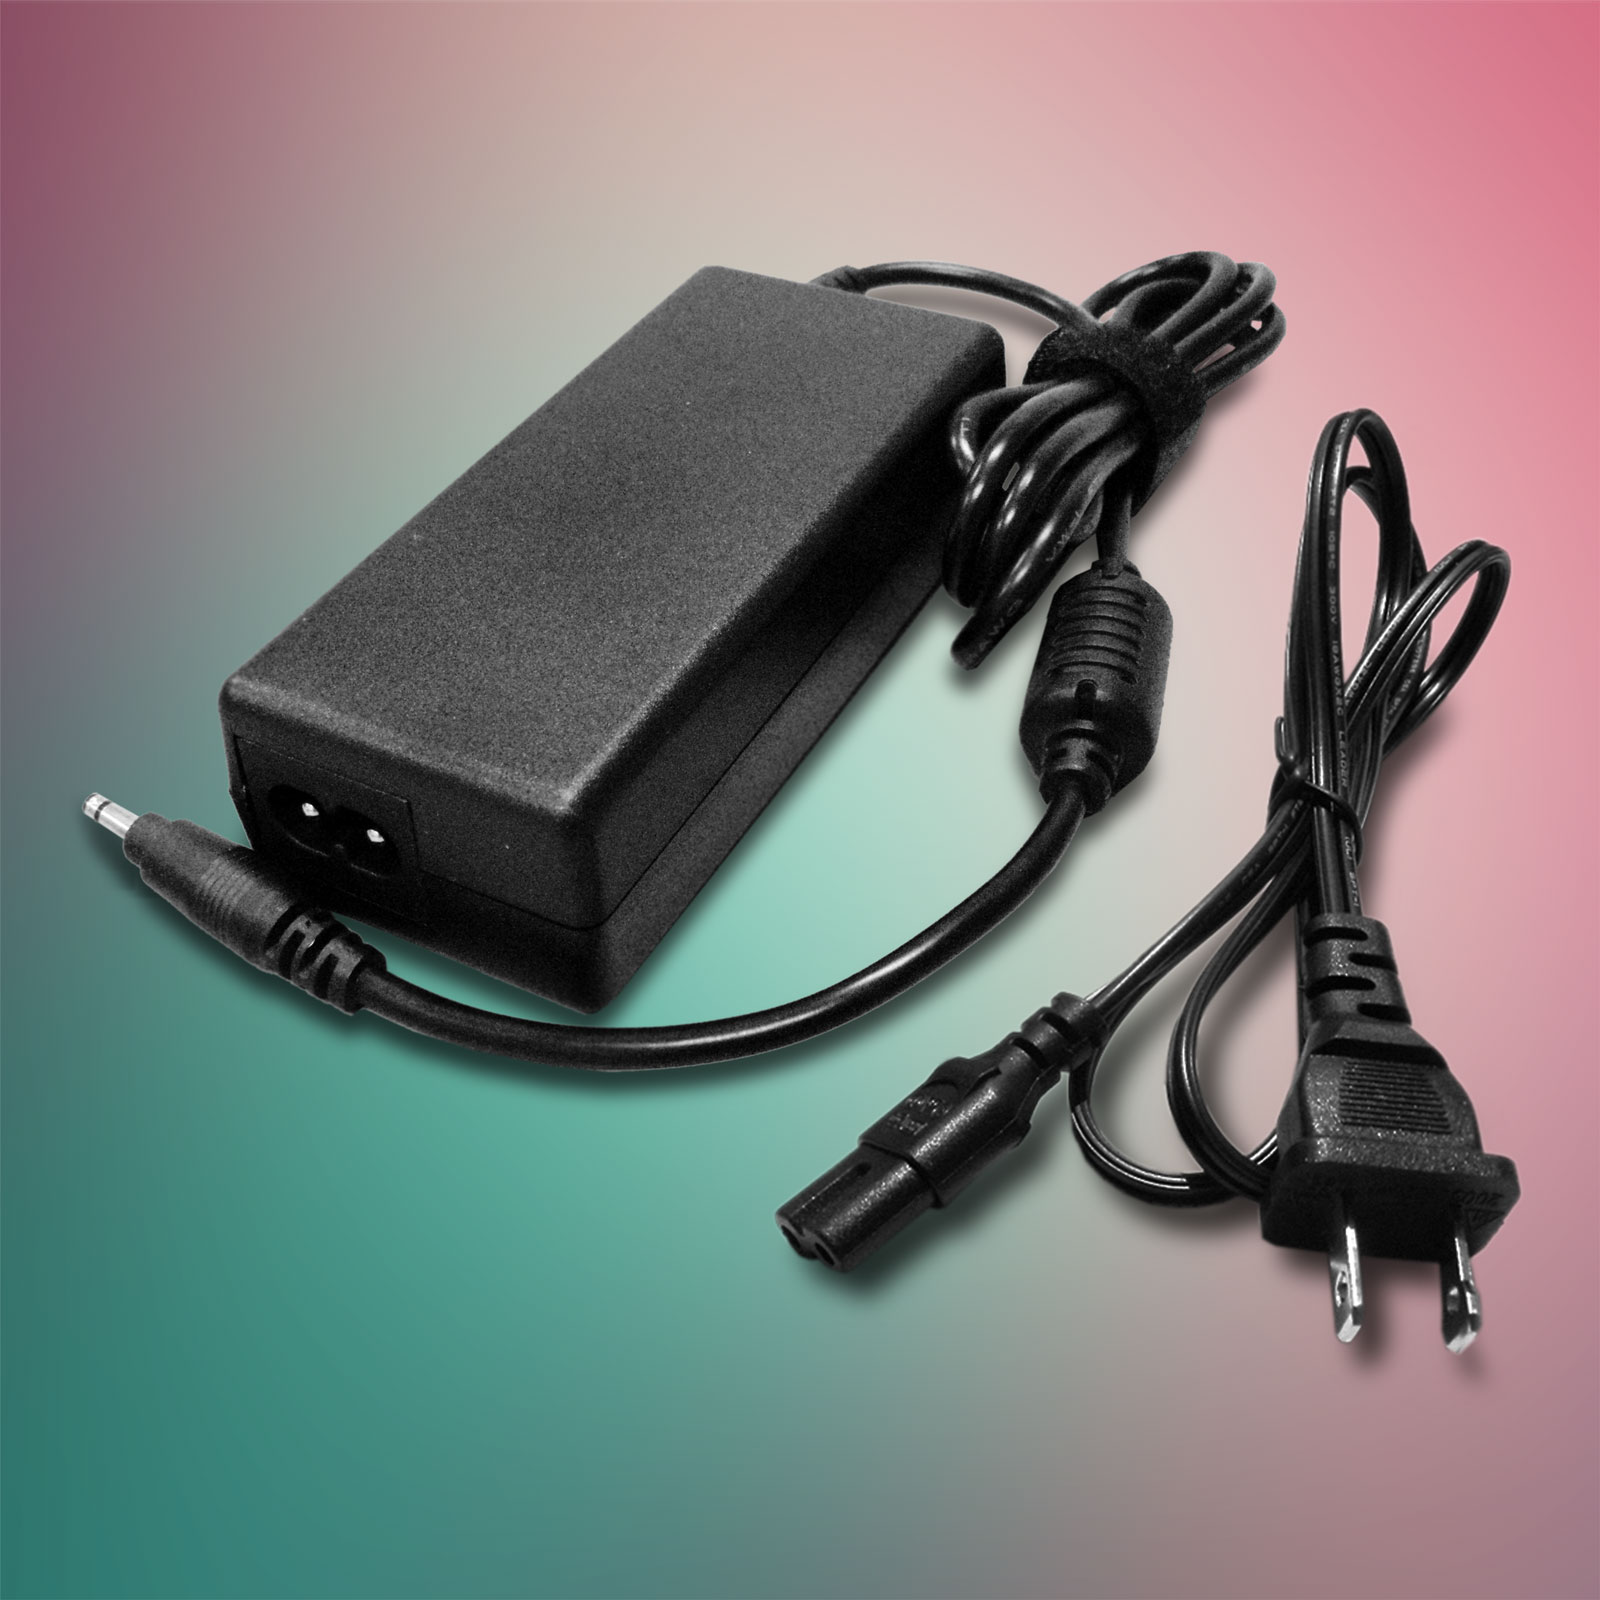 acer c710 chromebook charger